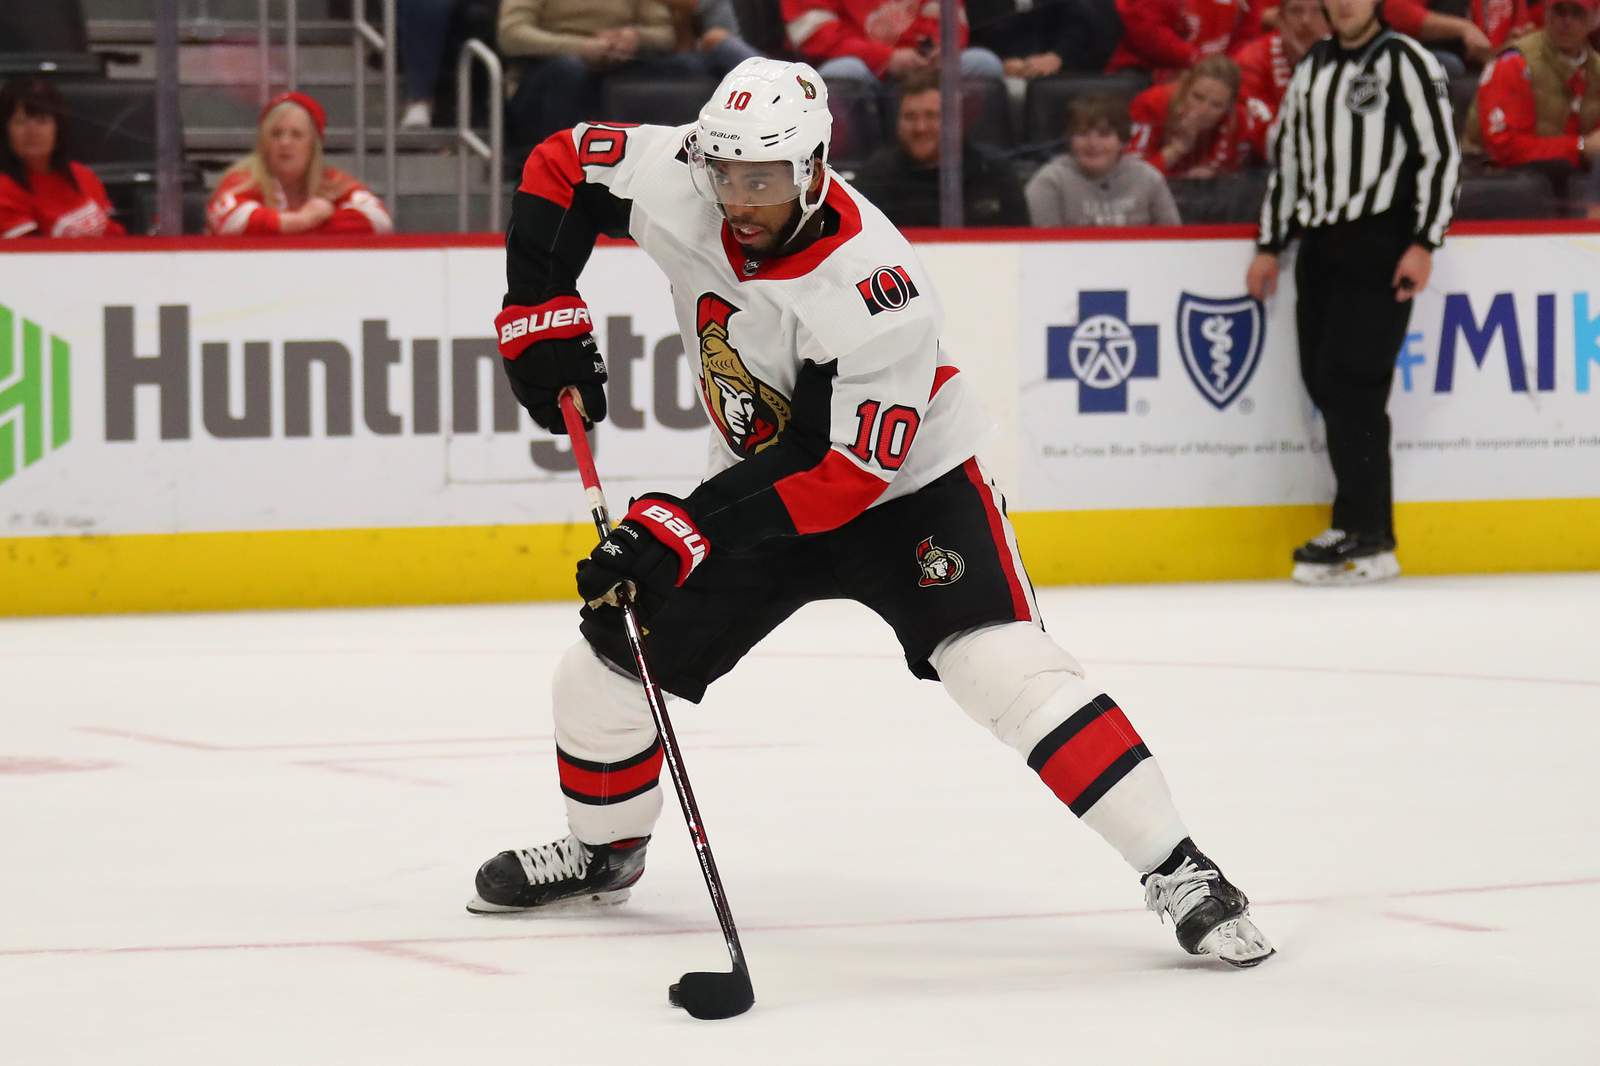 Panthers sign speedy scoring winger Anthony Duclair to one-year deal